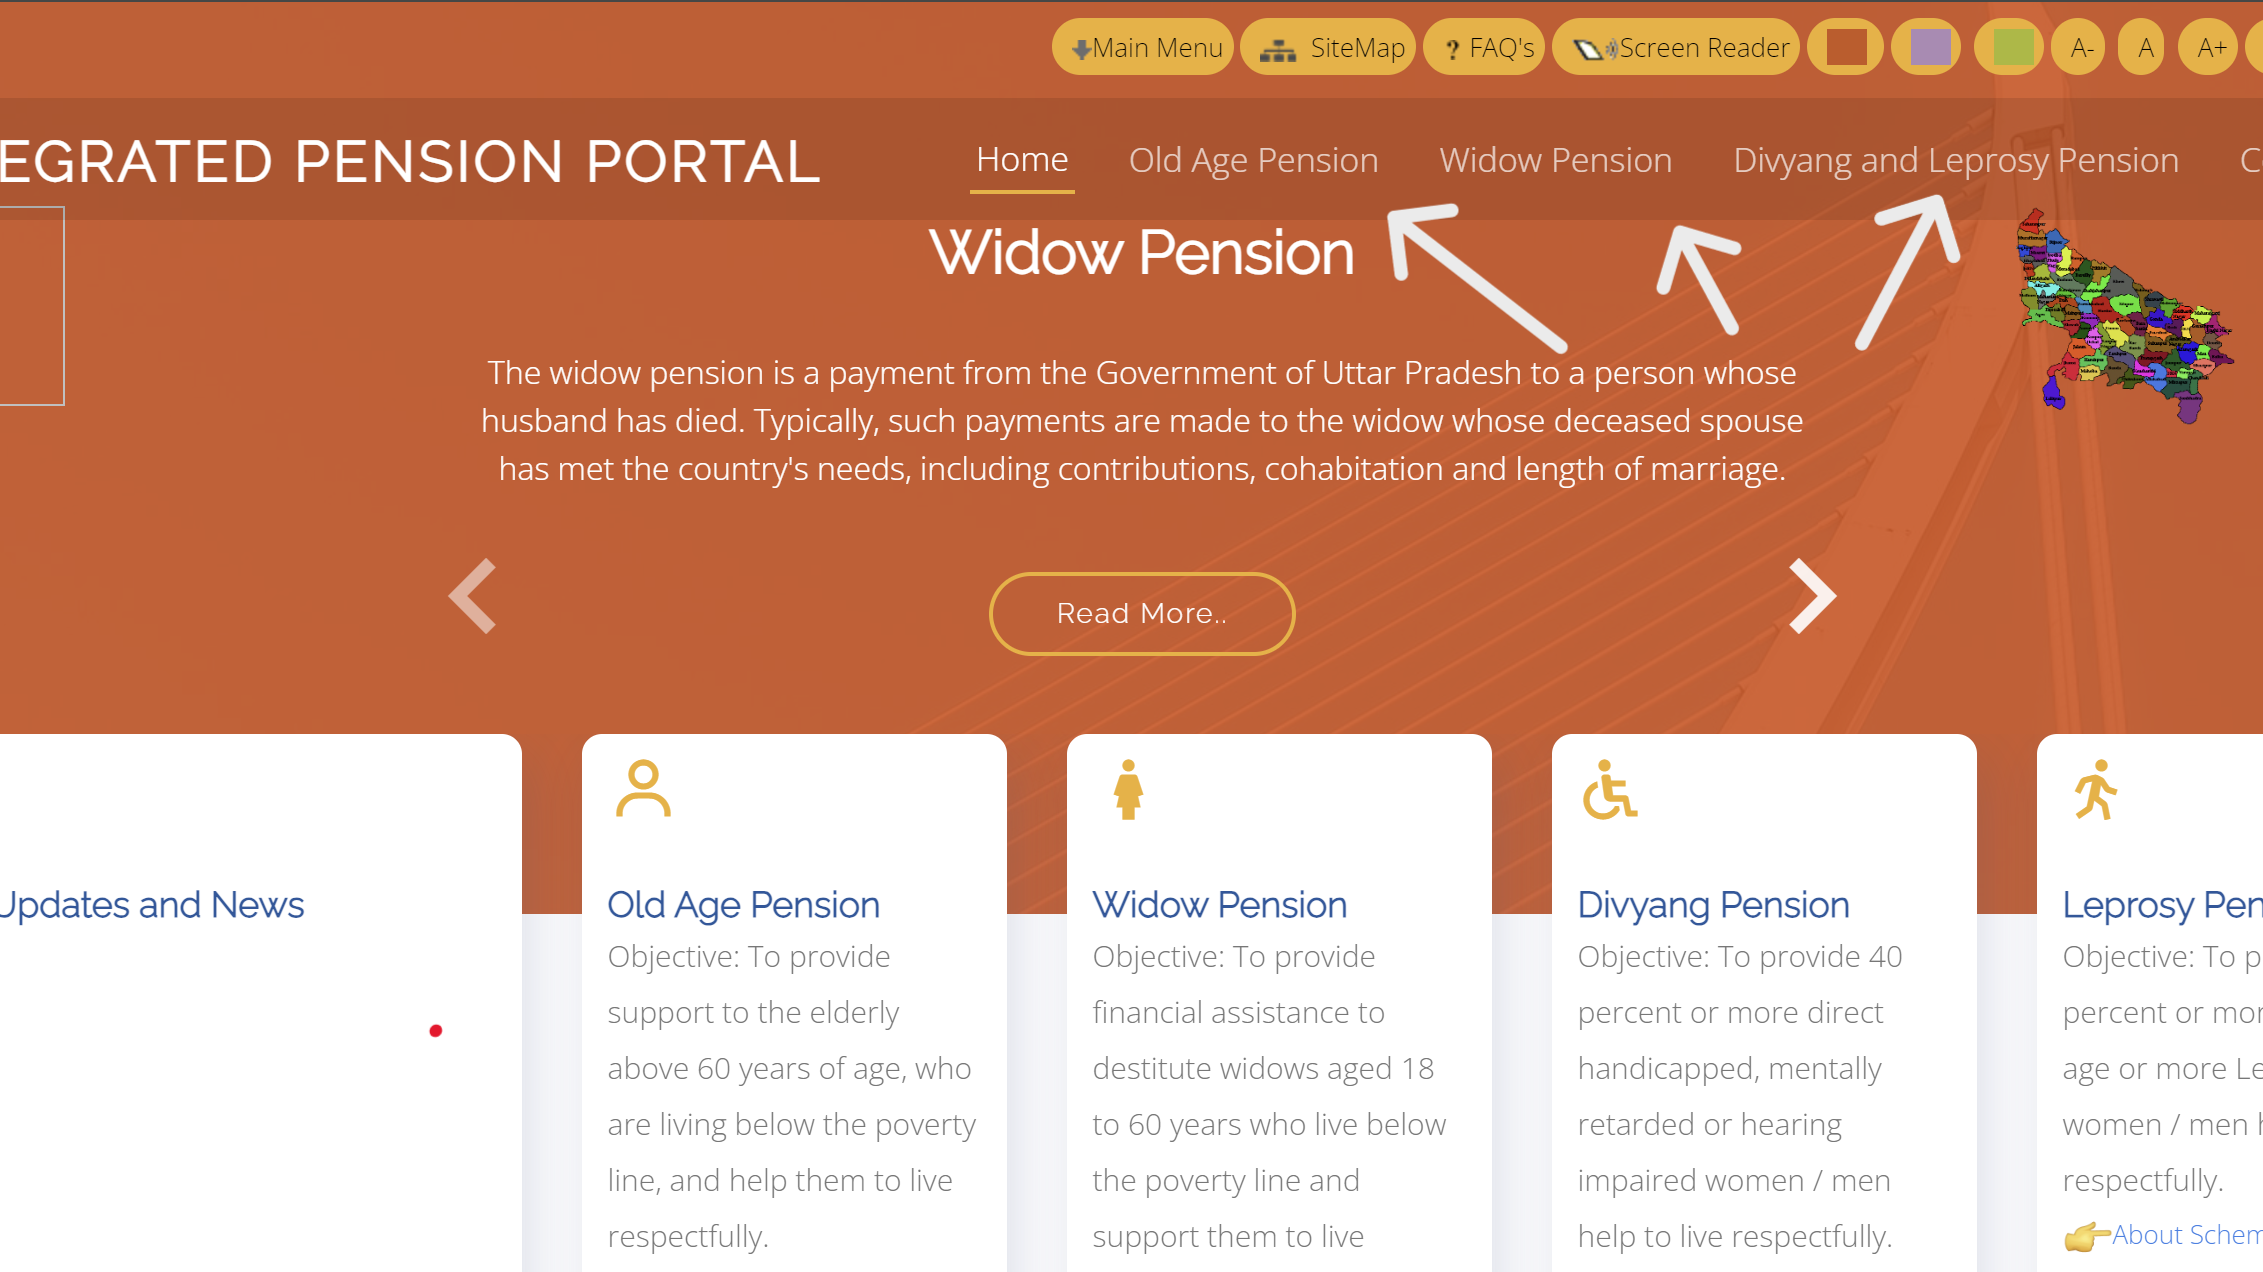 INTEGRATED PENSION PORTAL UP